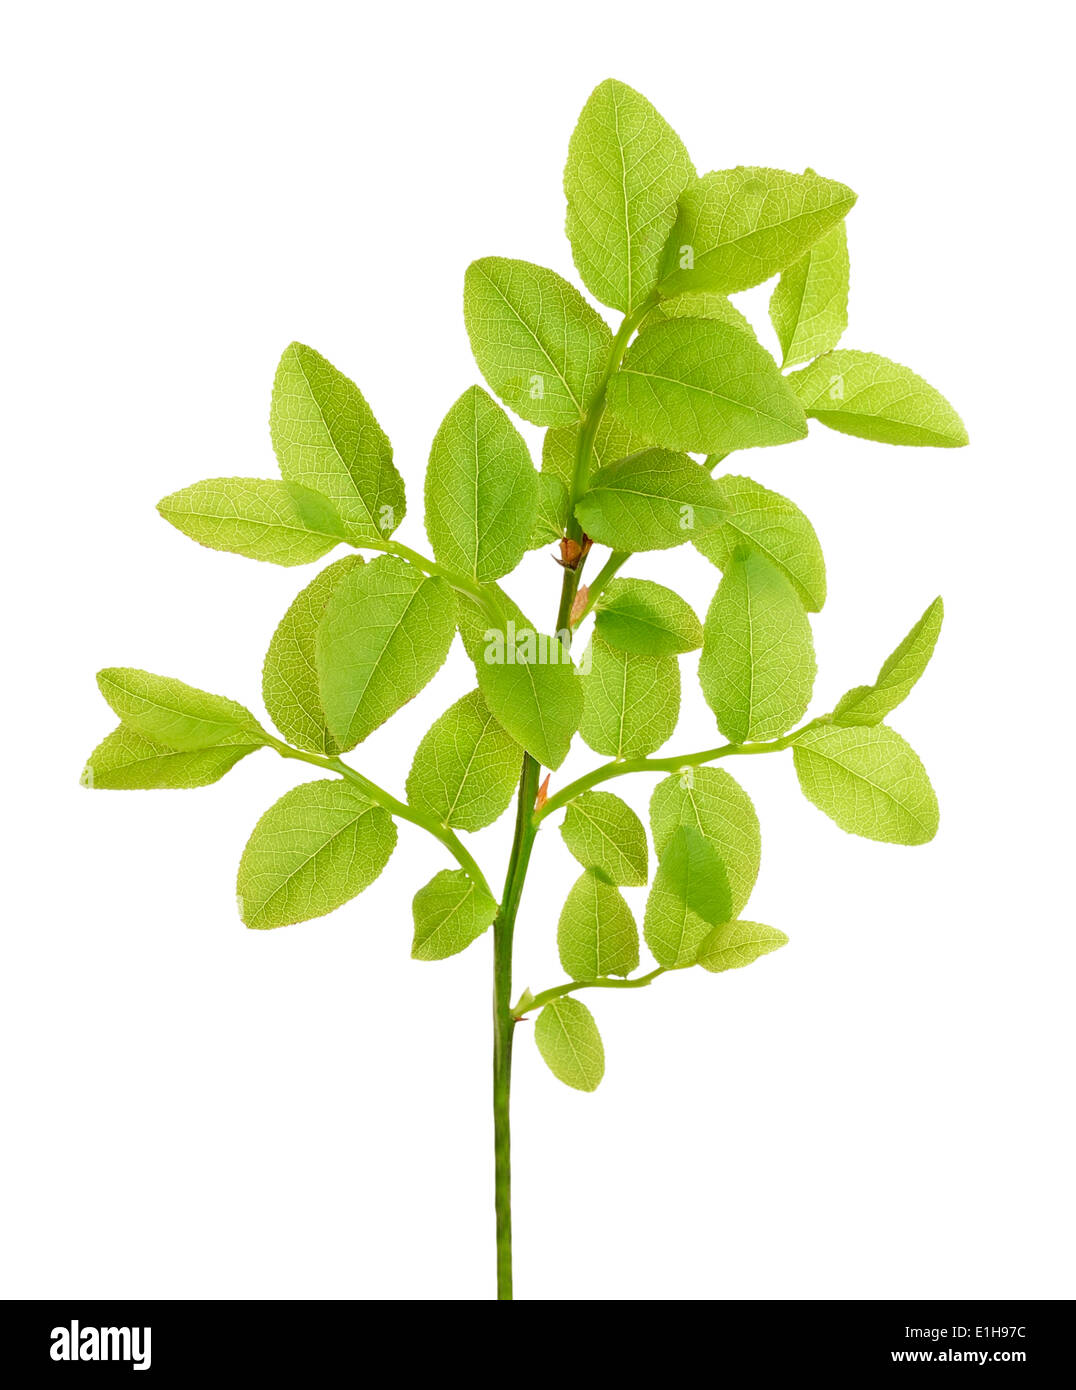 Vaccinium myrtillus branch isolated on white background Stock Photo